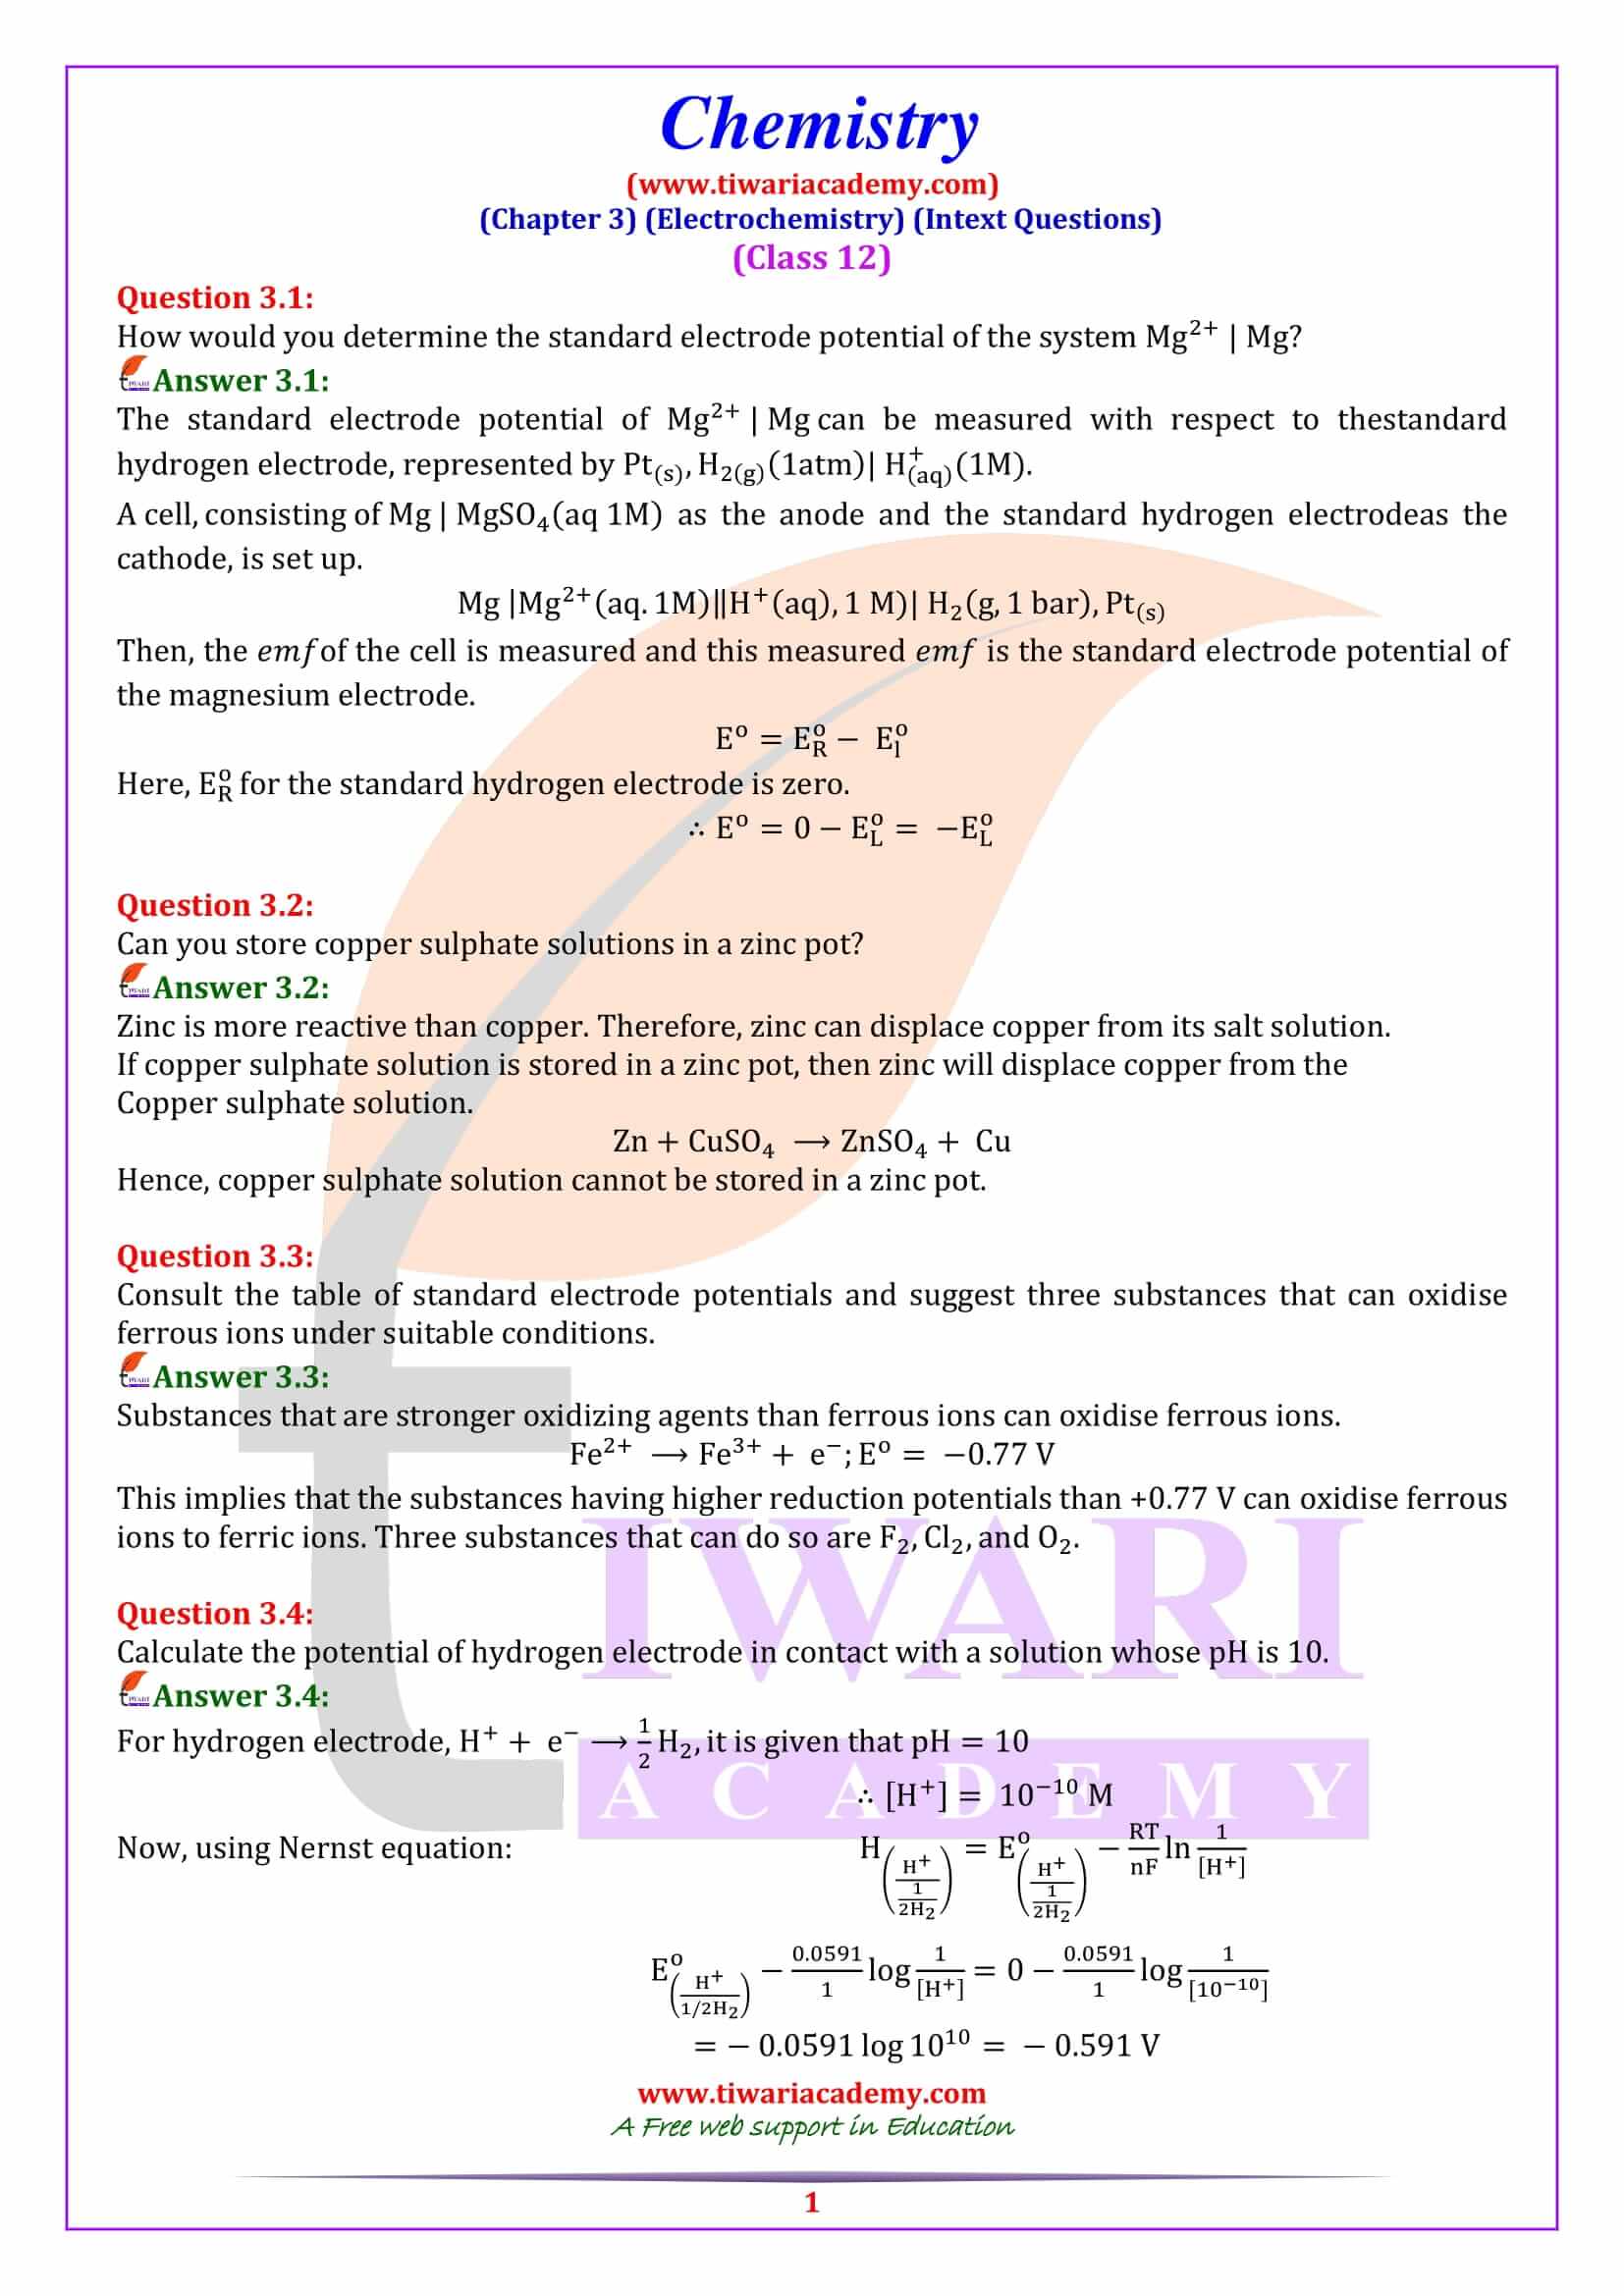 NCERT Solutions for Class 12 Chemistry Chapter 3 intext